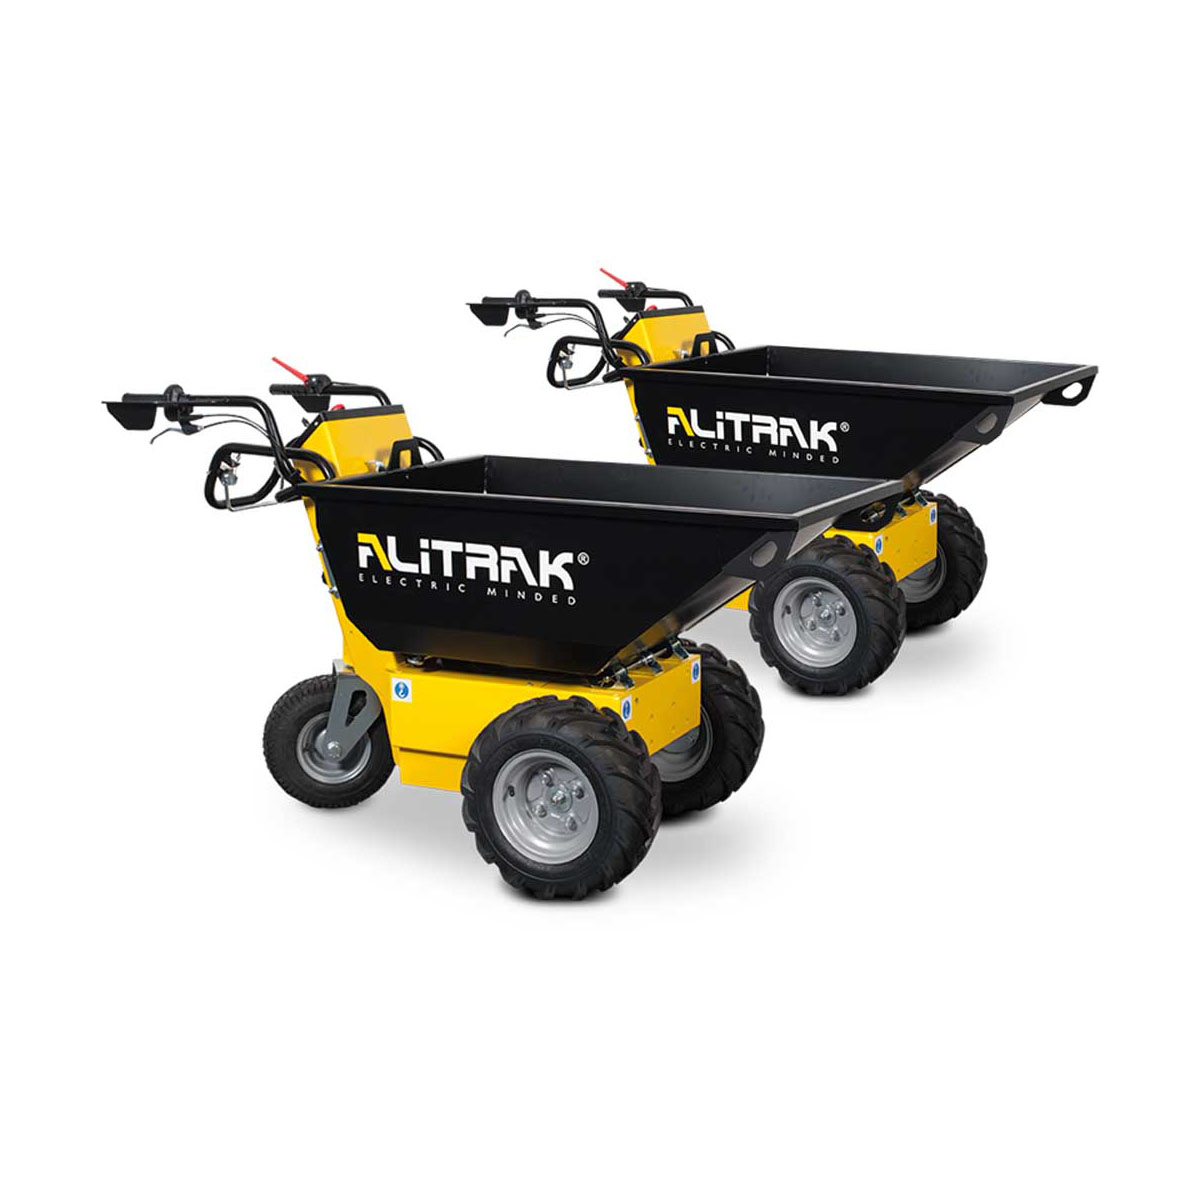 Buy Electric Dumper - Skip in Electric Dumpers from Alitrak available at Astrolift NZ